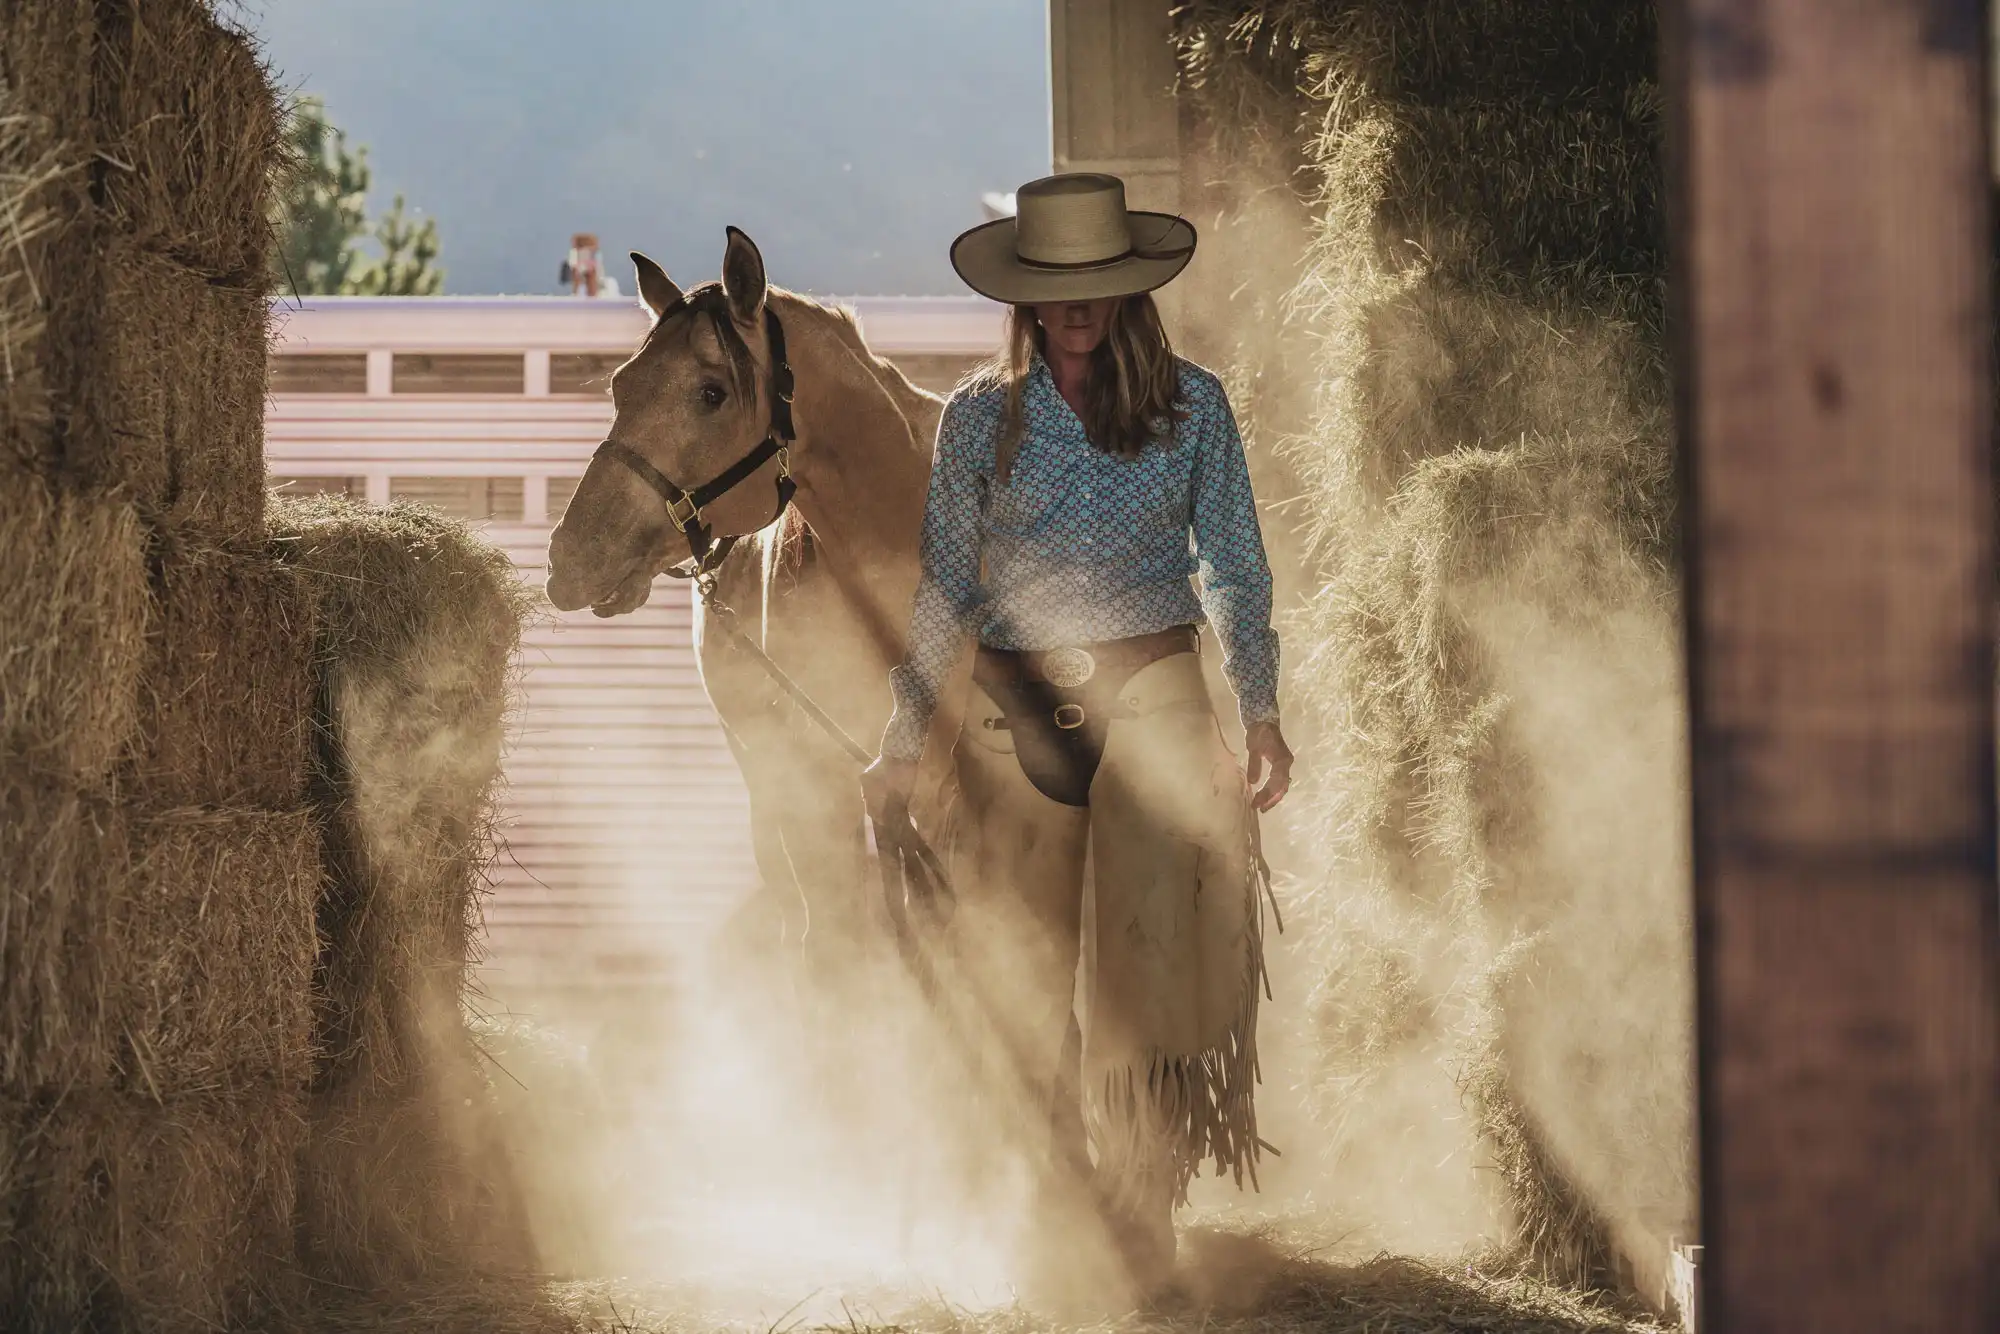 Cowgirl in blue shirt and beige fringed chaps leading a palomino horse through a dusty barn, with sunlight casting a warm glow and highlighting hay bales.